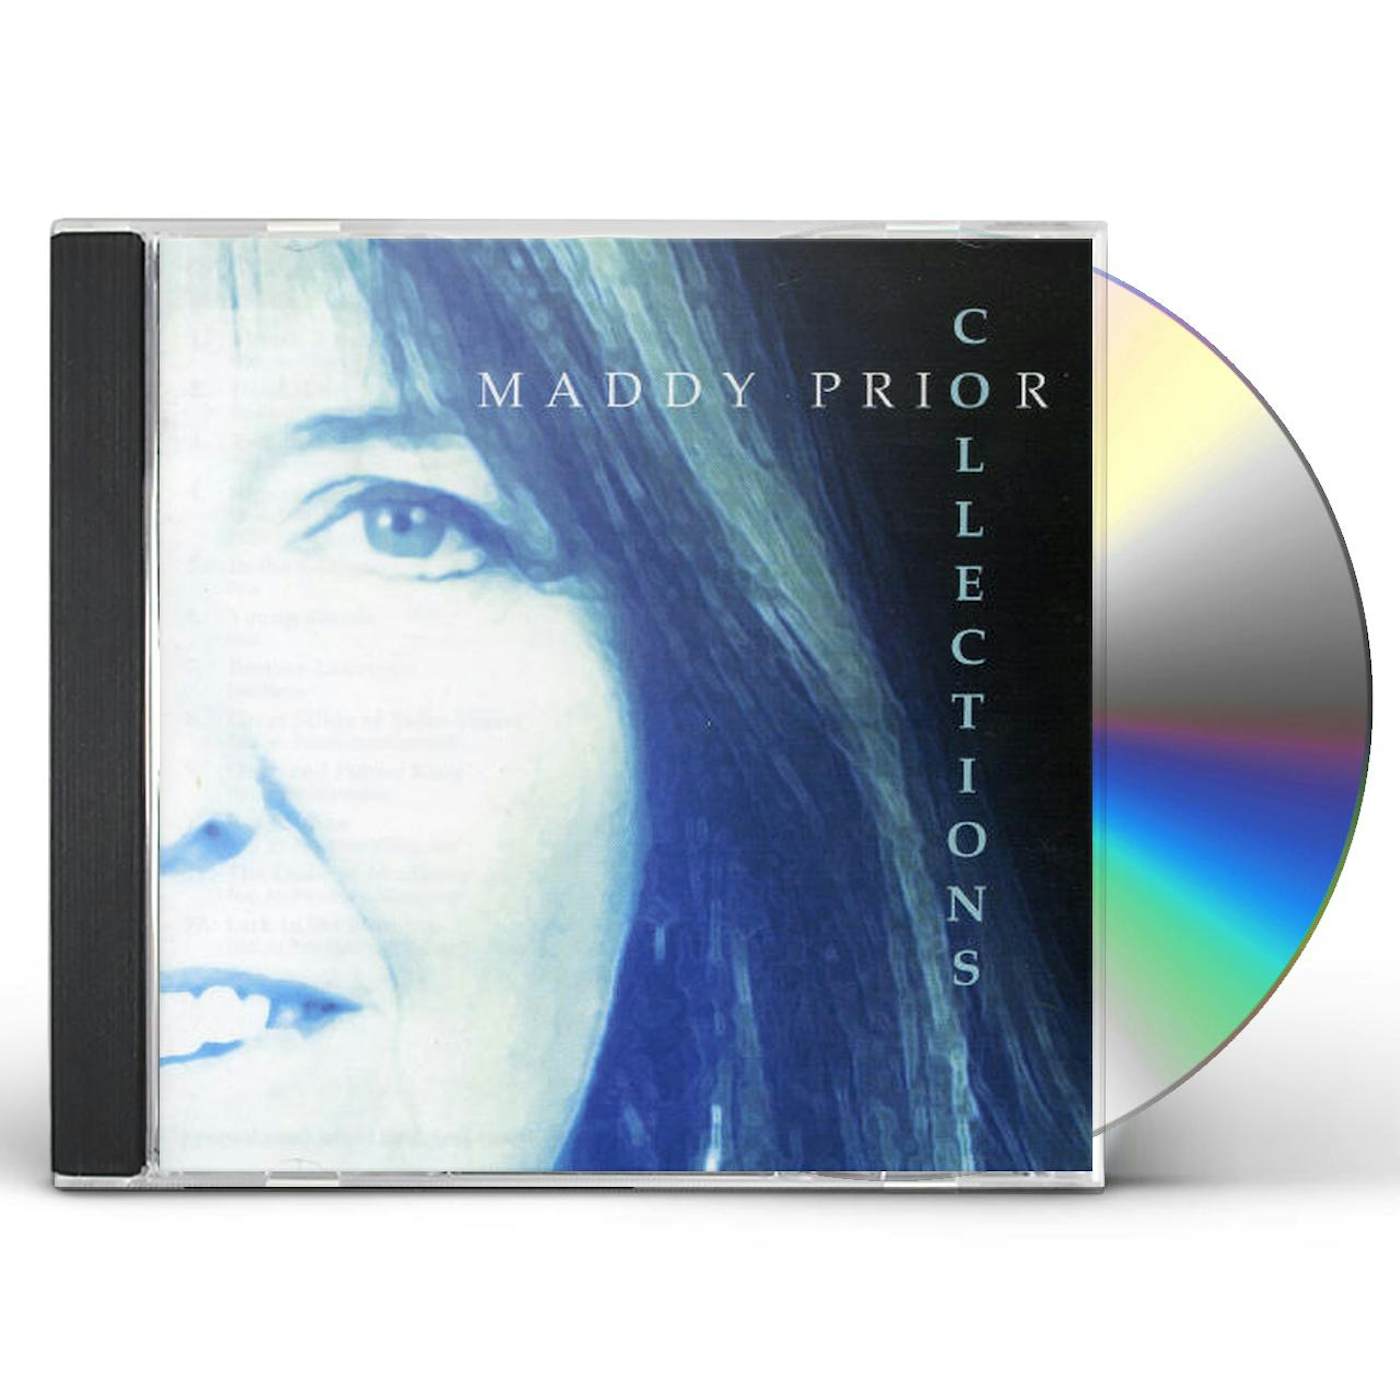 Maddy Prior COLLECTIONS: VERY BEST OF 1995 - 2005 CD